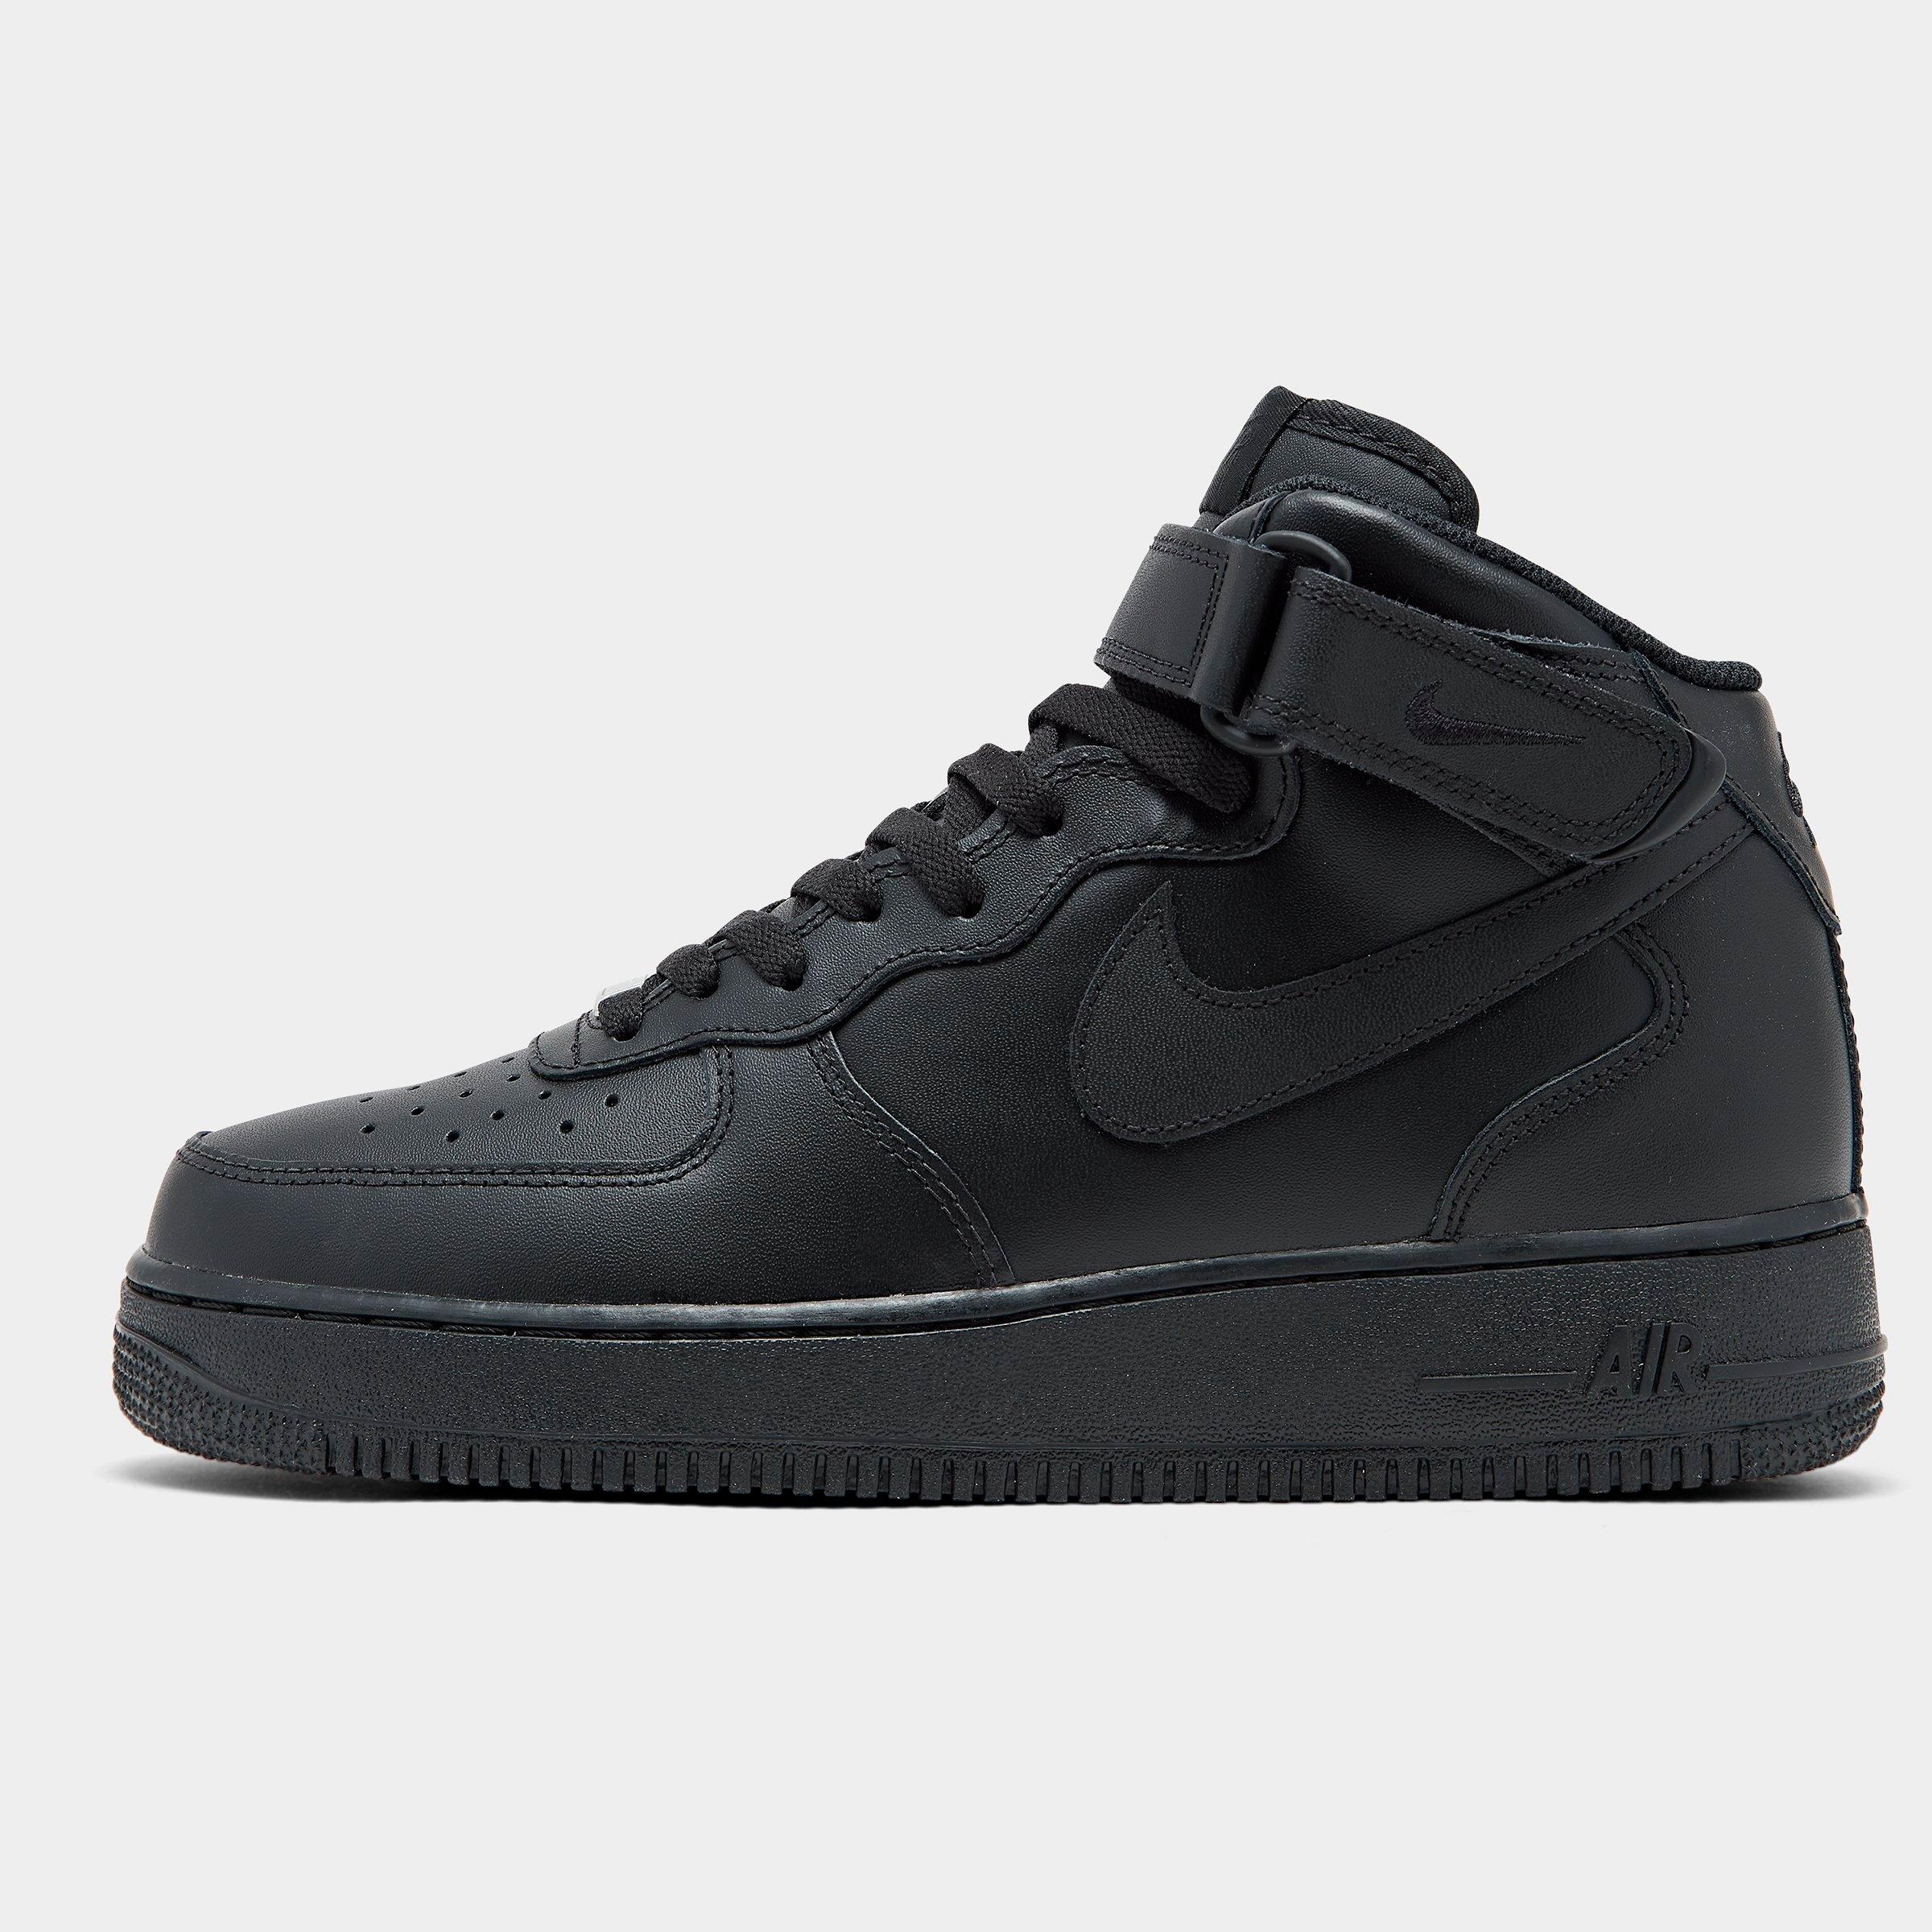 all black airforce 1s